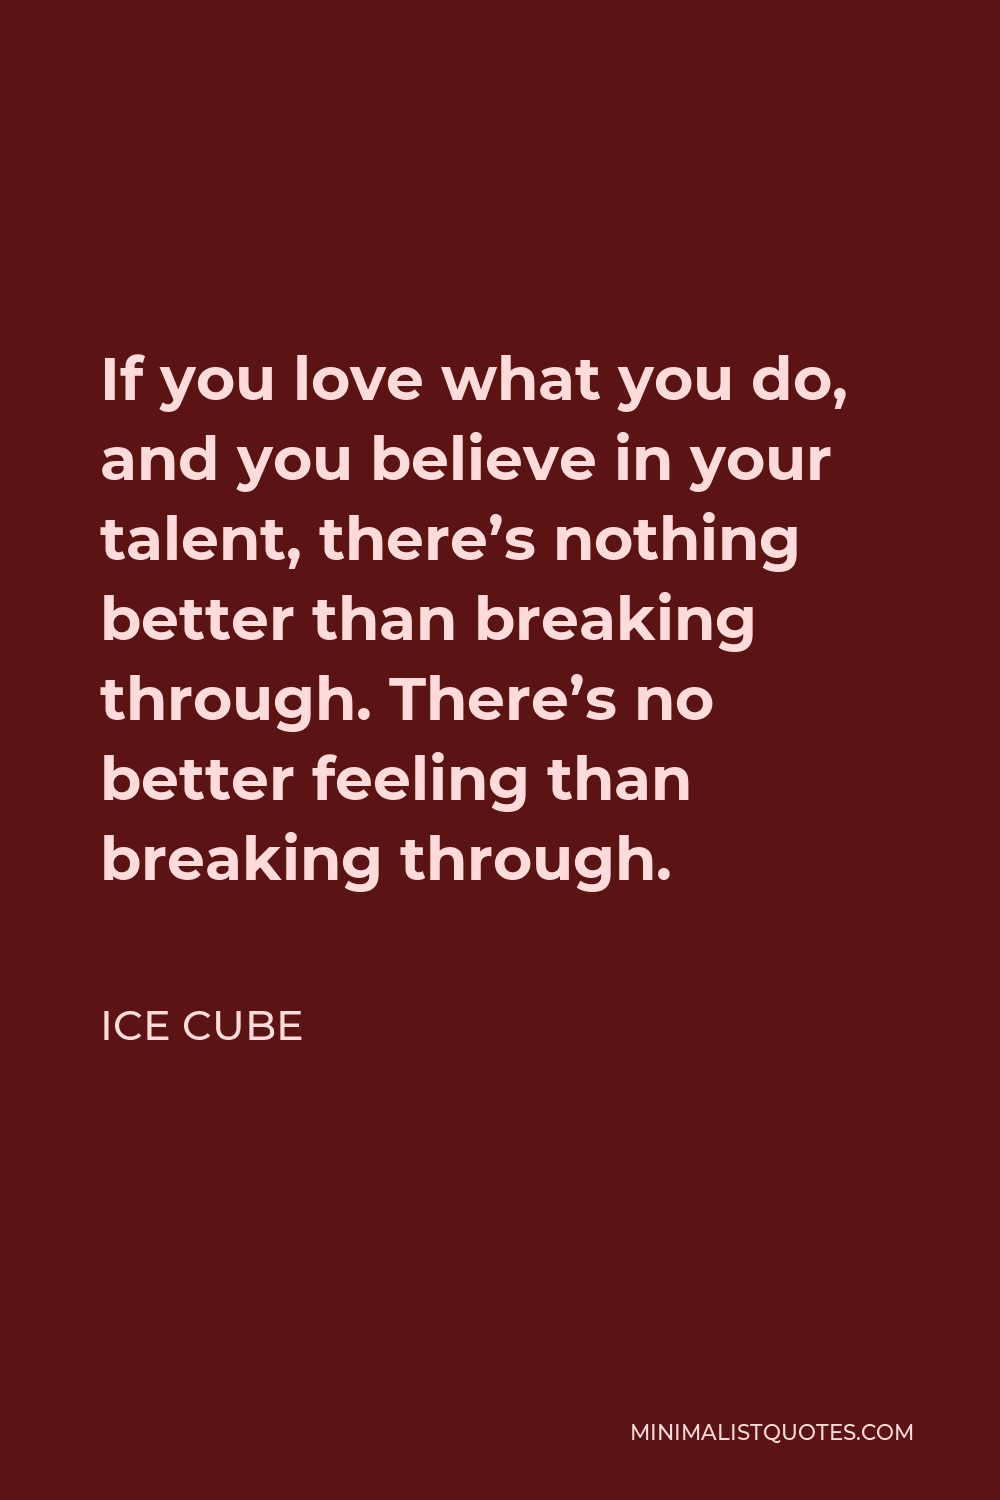 Ice Cube Quote - If you love what you do, and you believe in your talent, there’s nothing better than breaking through. There’s no better feeling than breaking through.